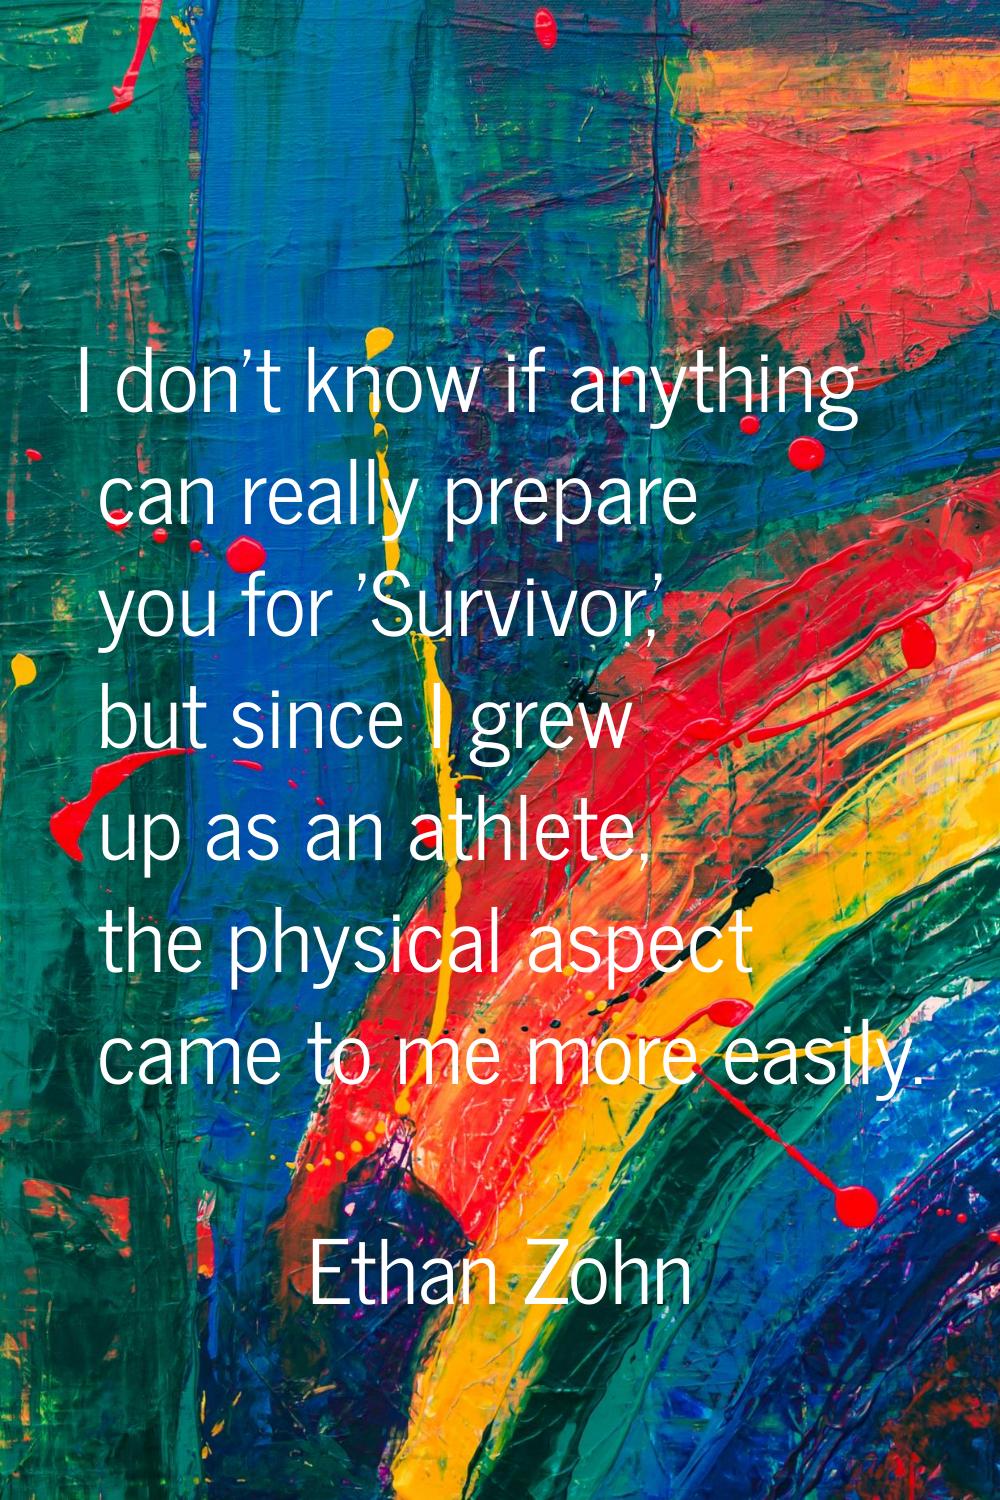 I don't know if anything can really prepare you for 'Survivor,' but since I grew up as an athlete, 